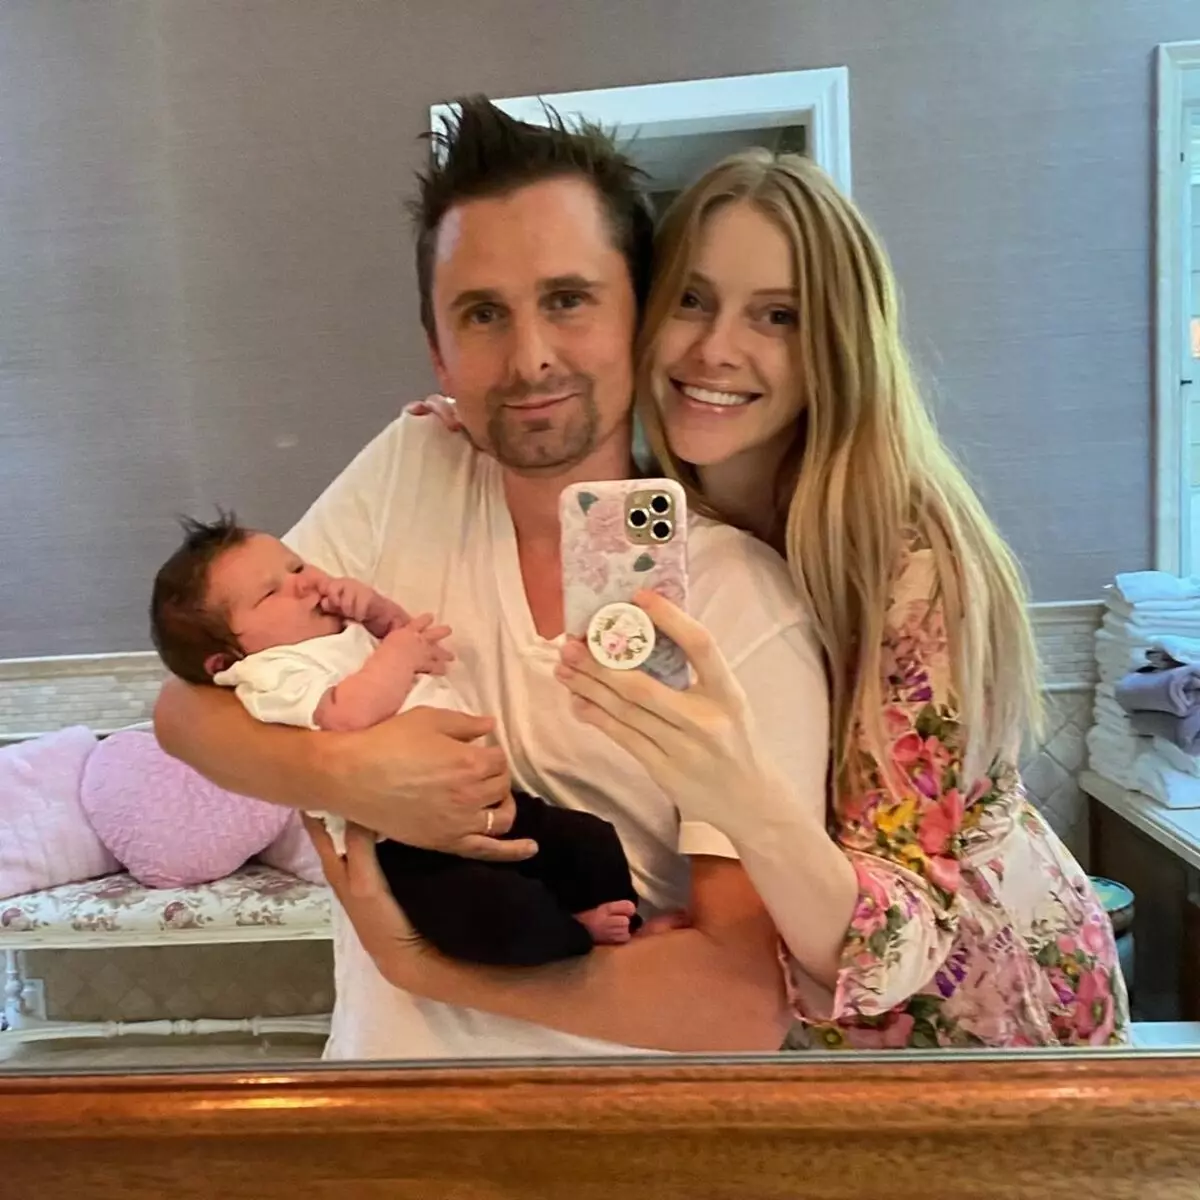 Frontman Muse Matthew Bellamy and Ell Evans for the first time became parents 78985_1